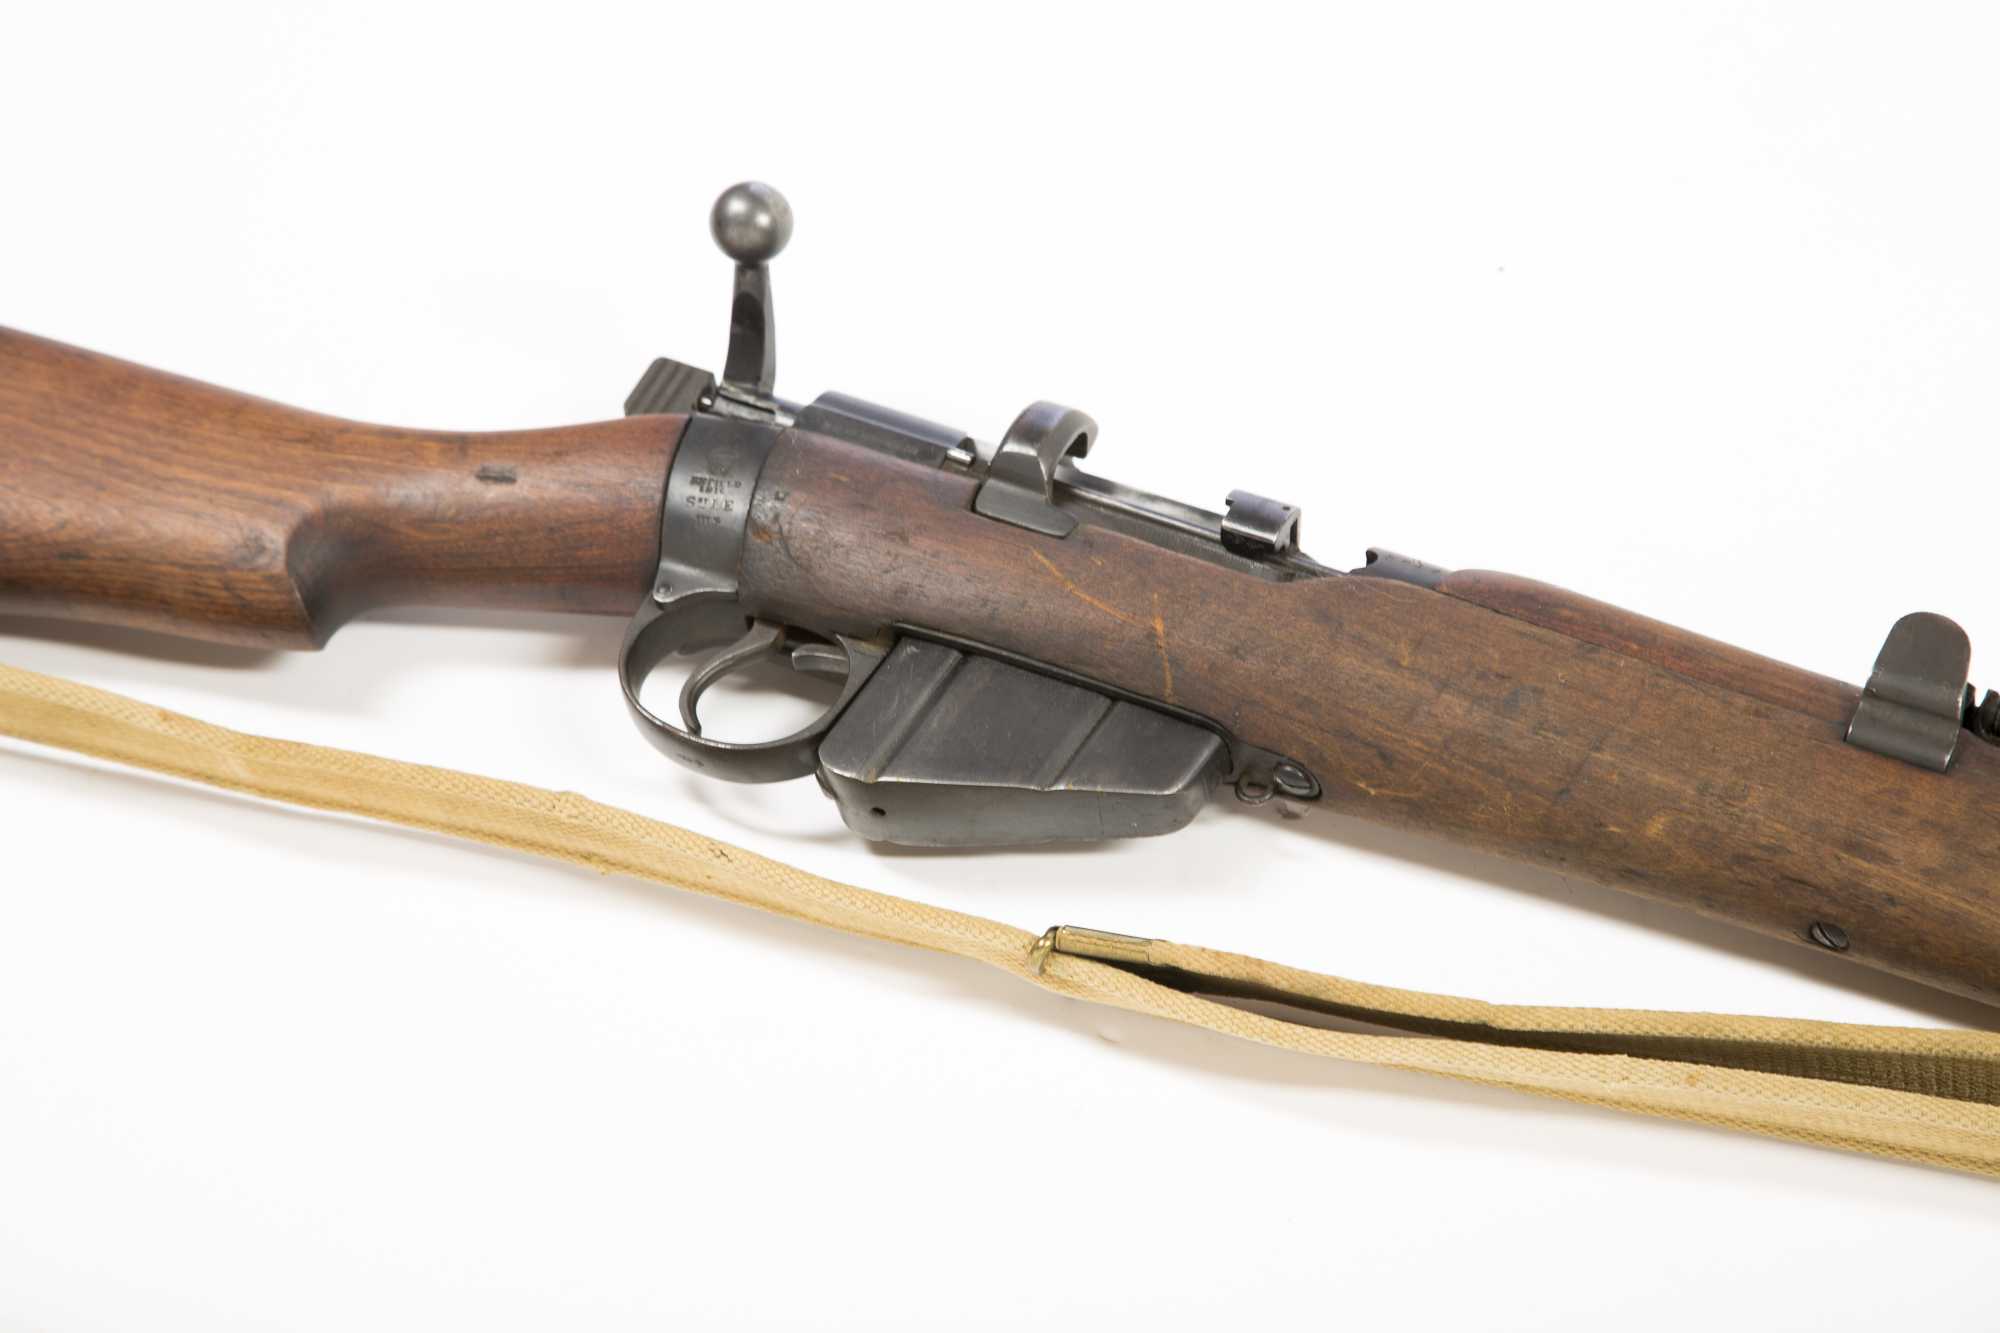 Lot 218G: Enfield SMLE No. 1 Mk III* Infantry Rifle Serial Number Q5014.